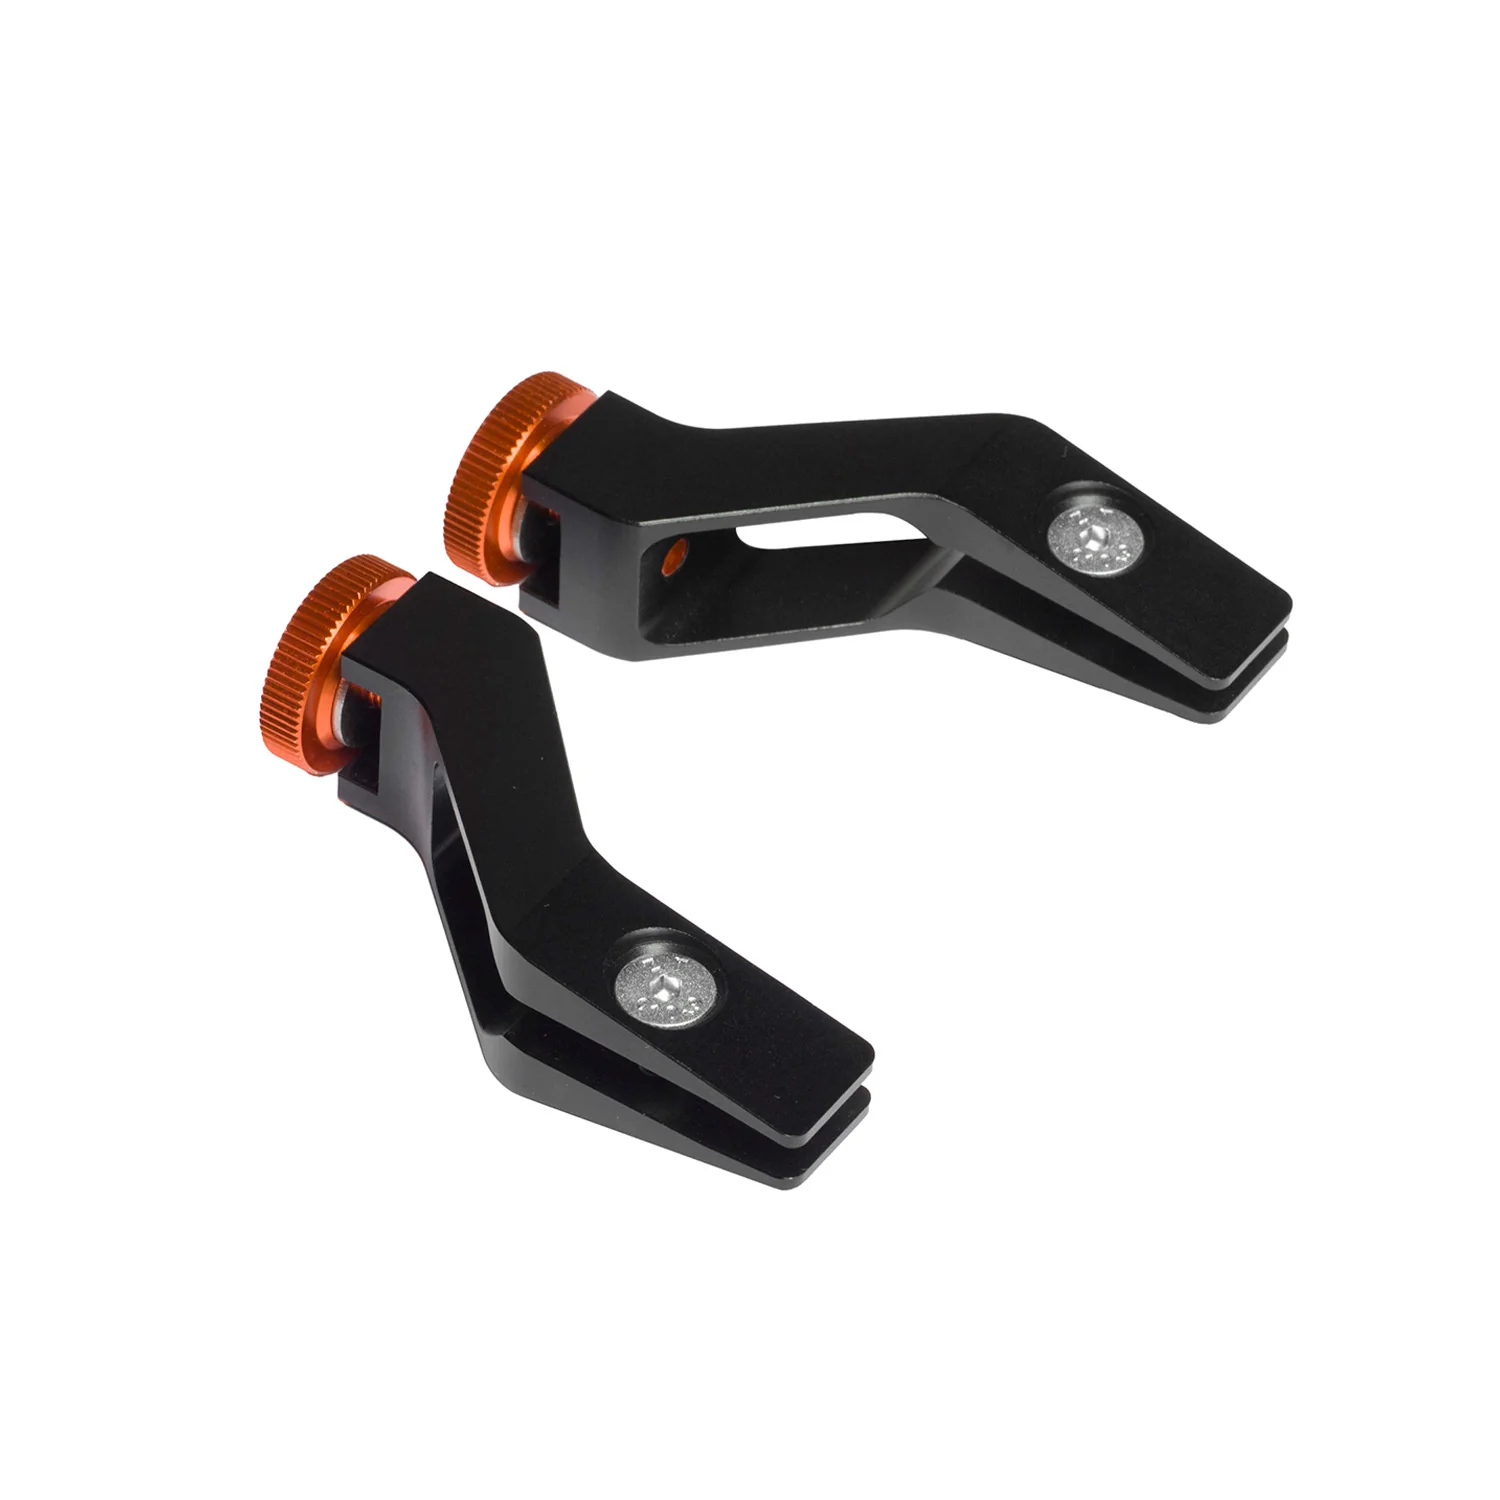 What is the difference in these clamps and the 2 sets that come with the RS Black system?